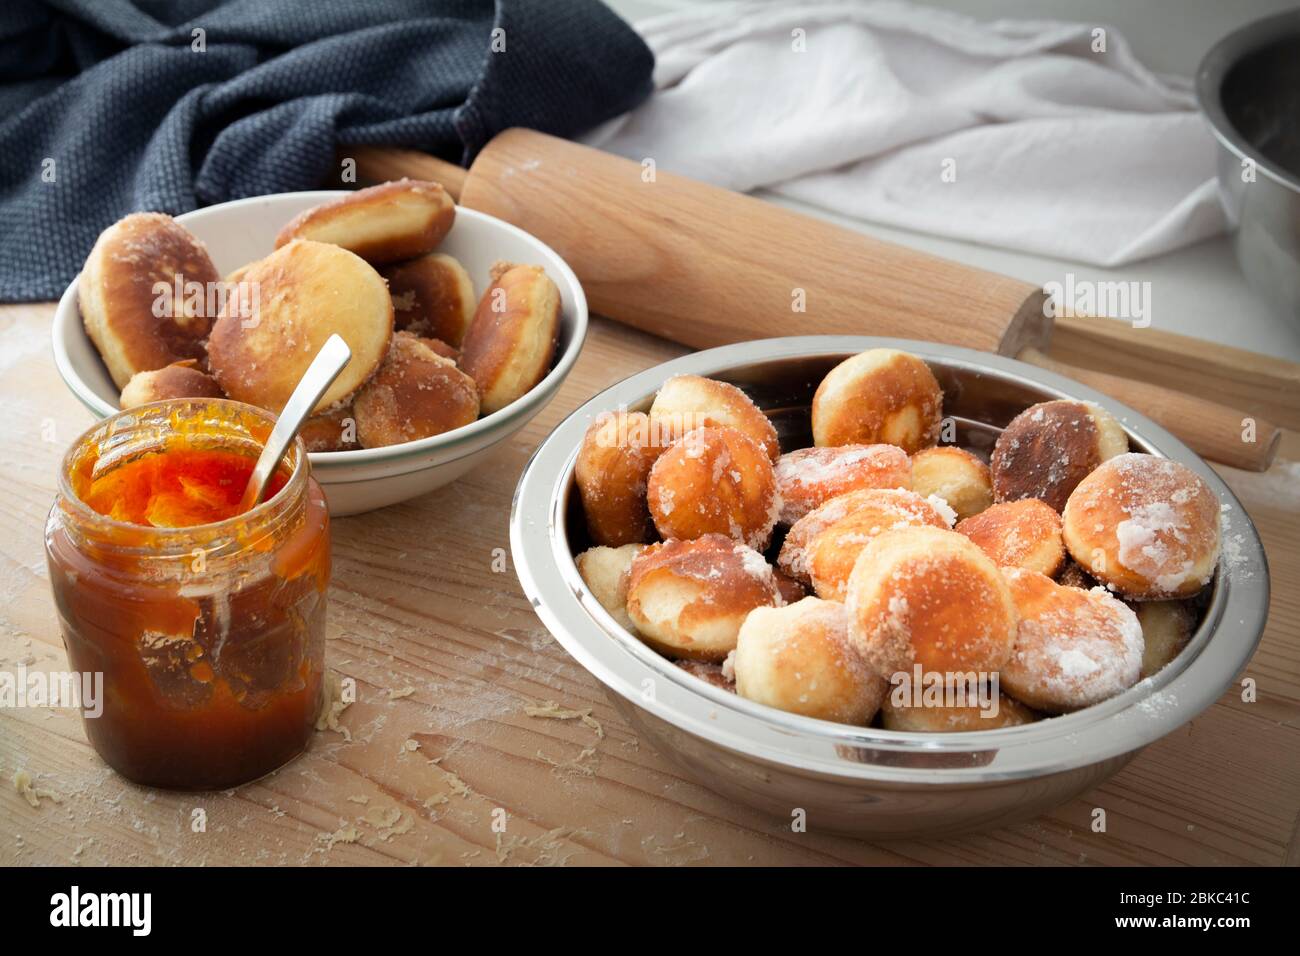 homemade donuts with jam in bowl on wooden table Stock Photo